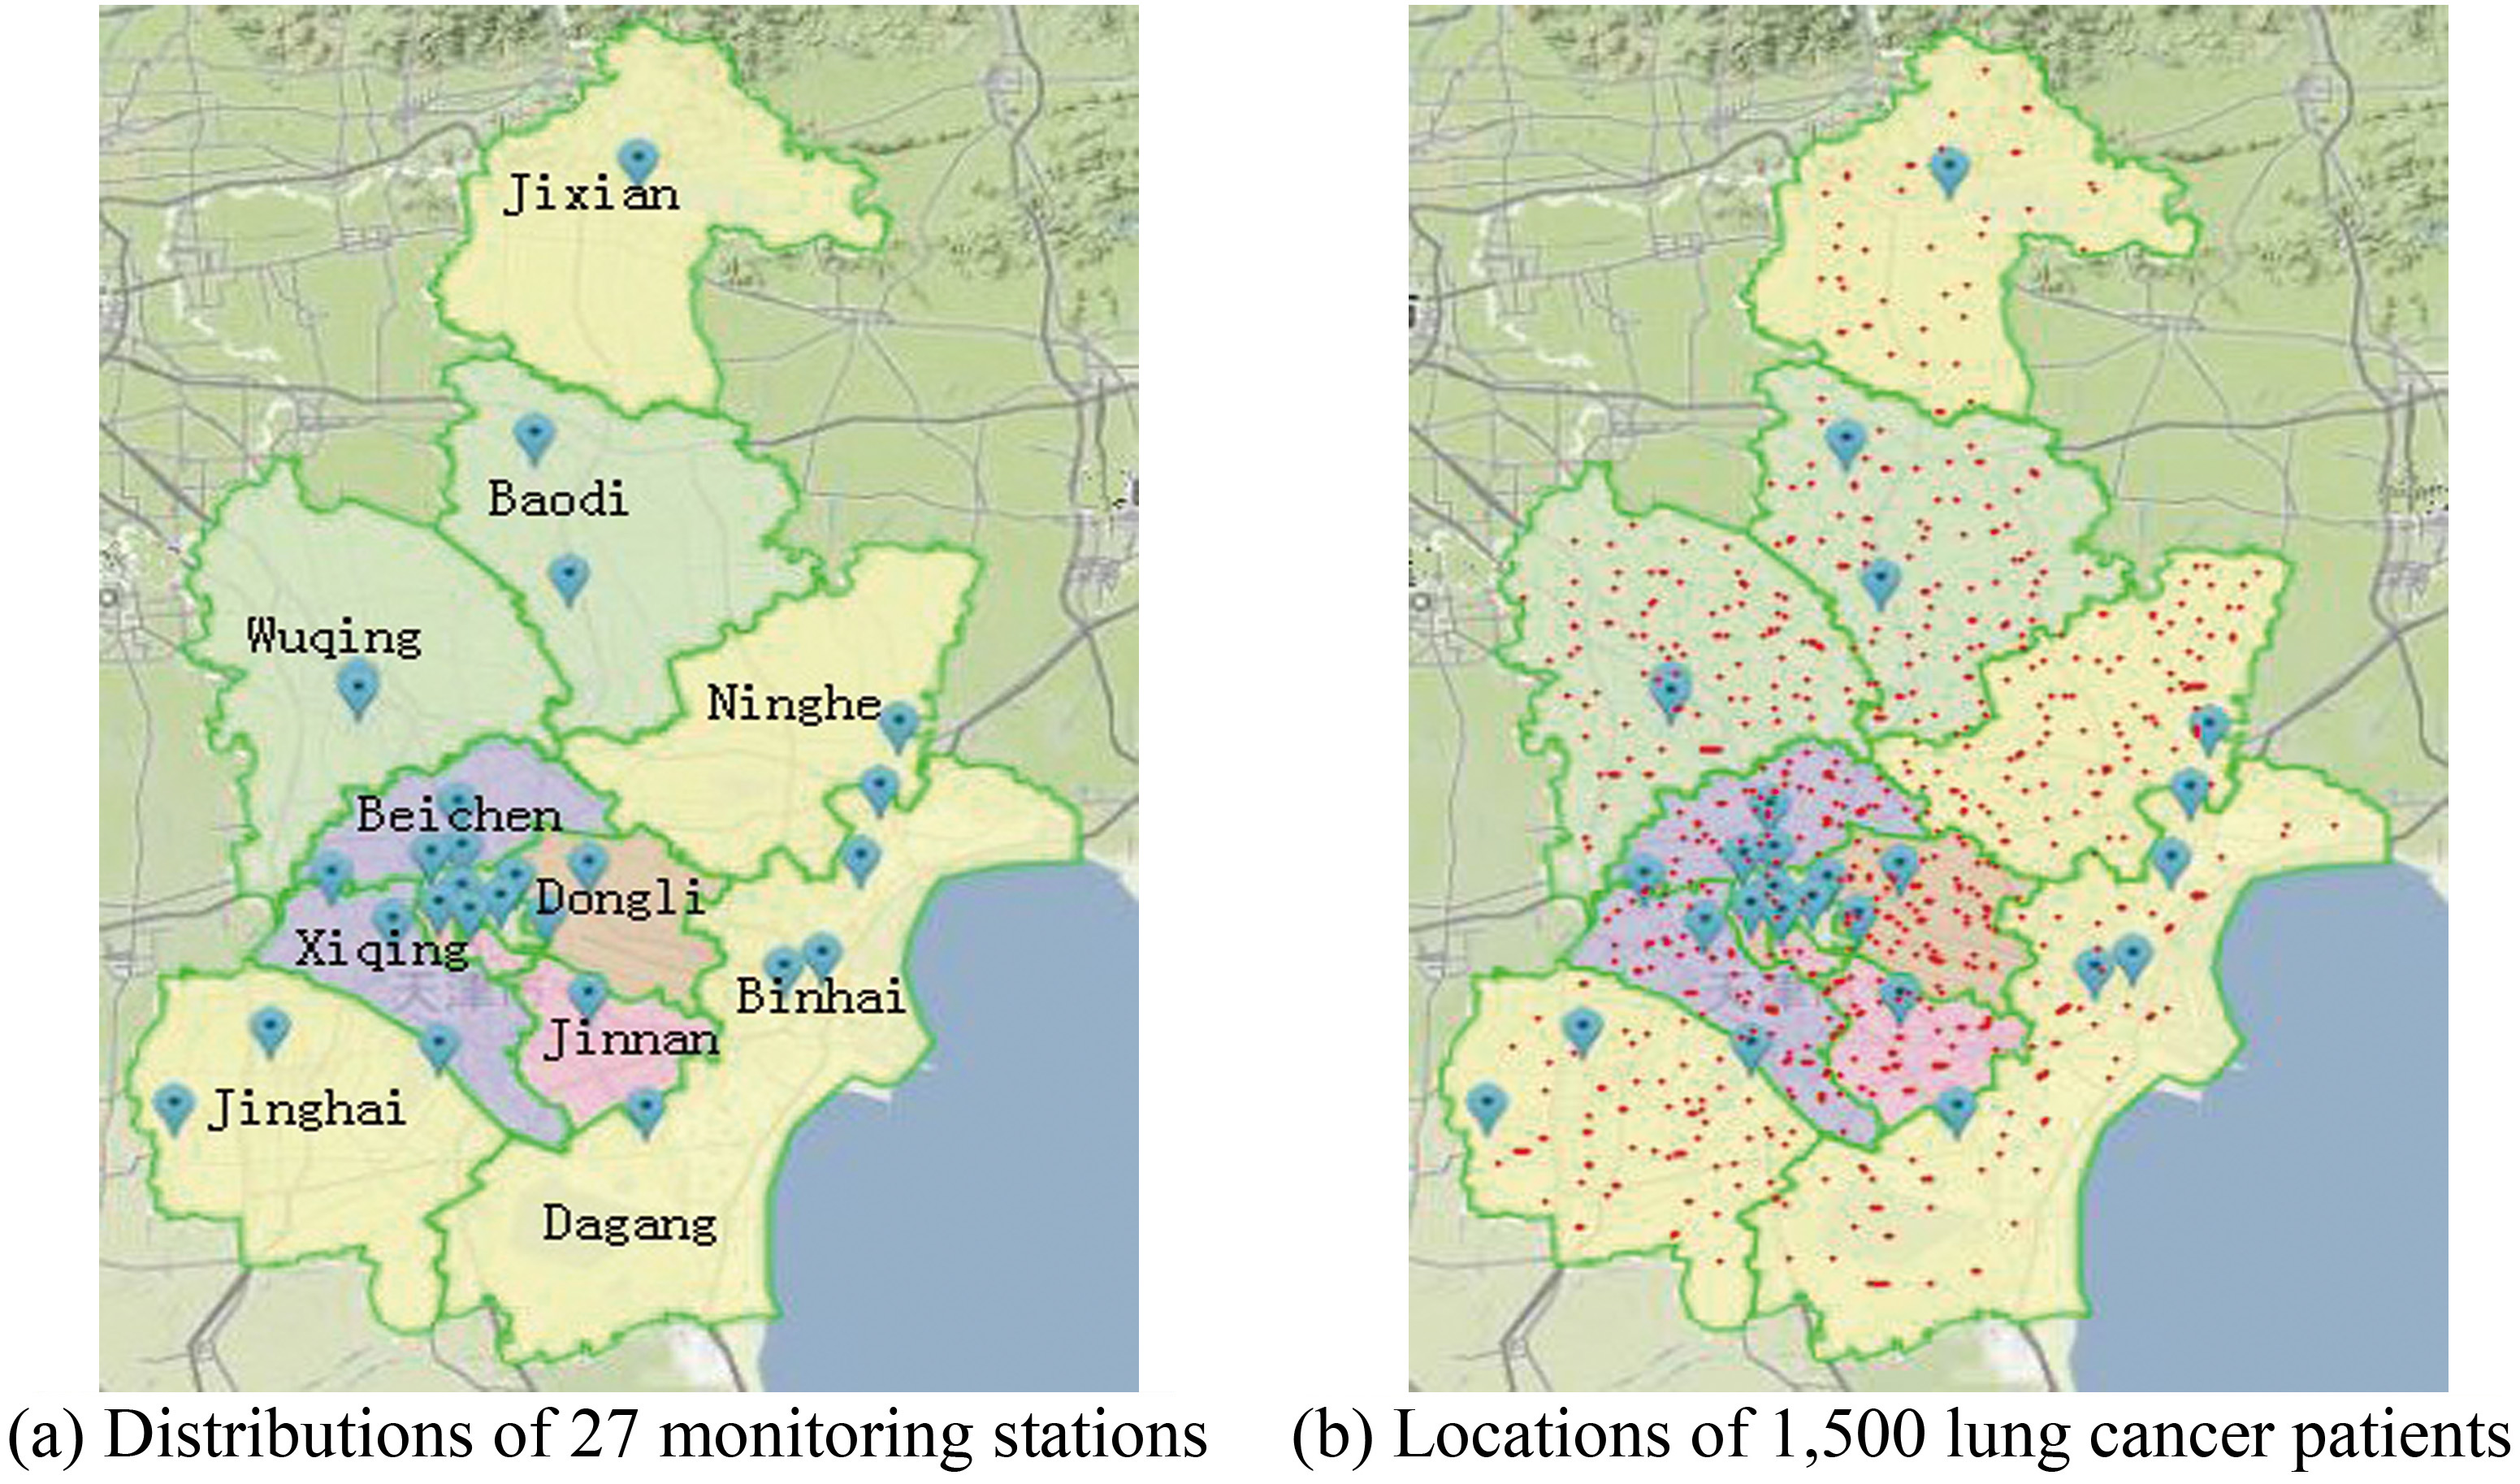 Twenty-seven air quality monitoring stations distributed throughout Tianjin (a) and locations of 1,500 lung cancer patients around these air quality monitoring stations (b).